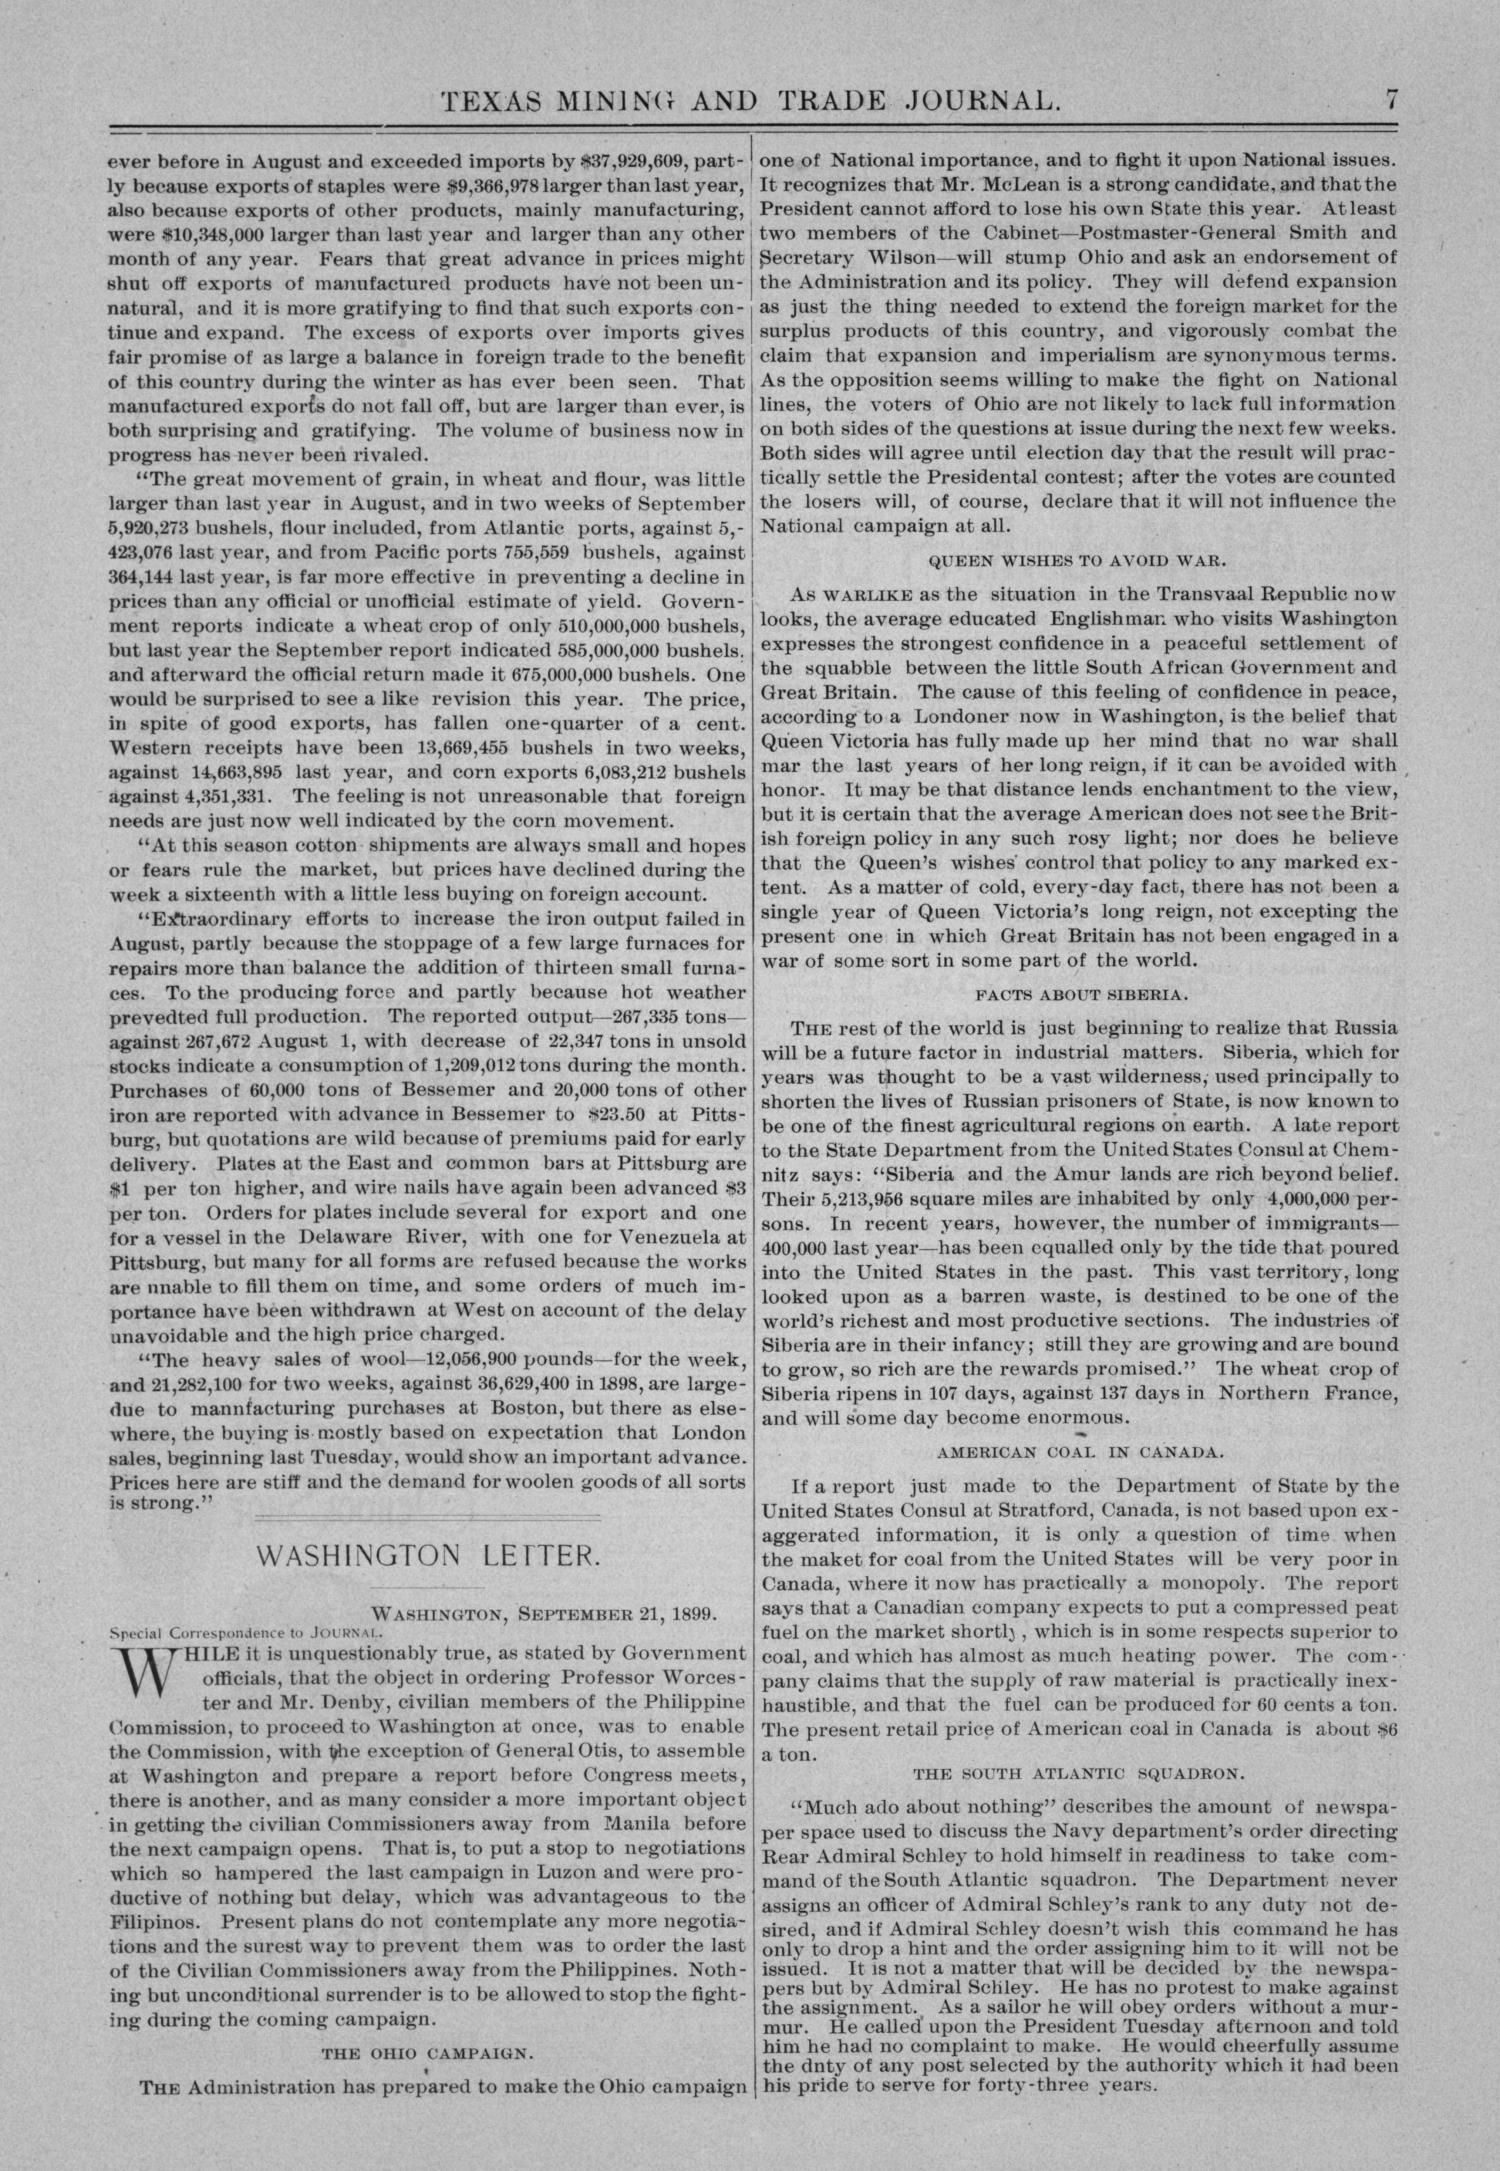 Texas Mining and Trade Journal, Volume 4, Number 10, Saturday, September 23, 1899
                                                
                                                    7
                                                